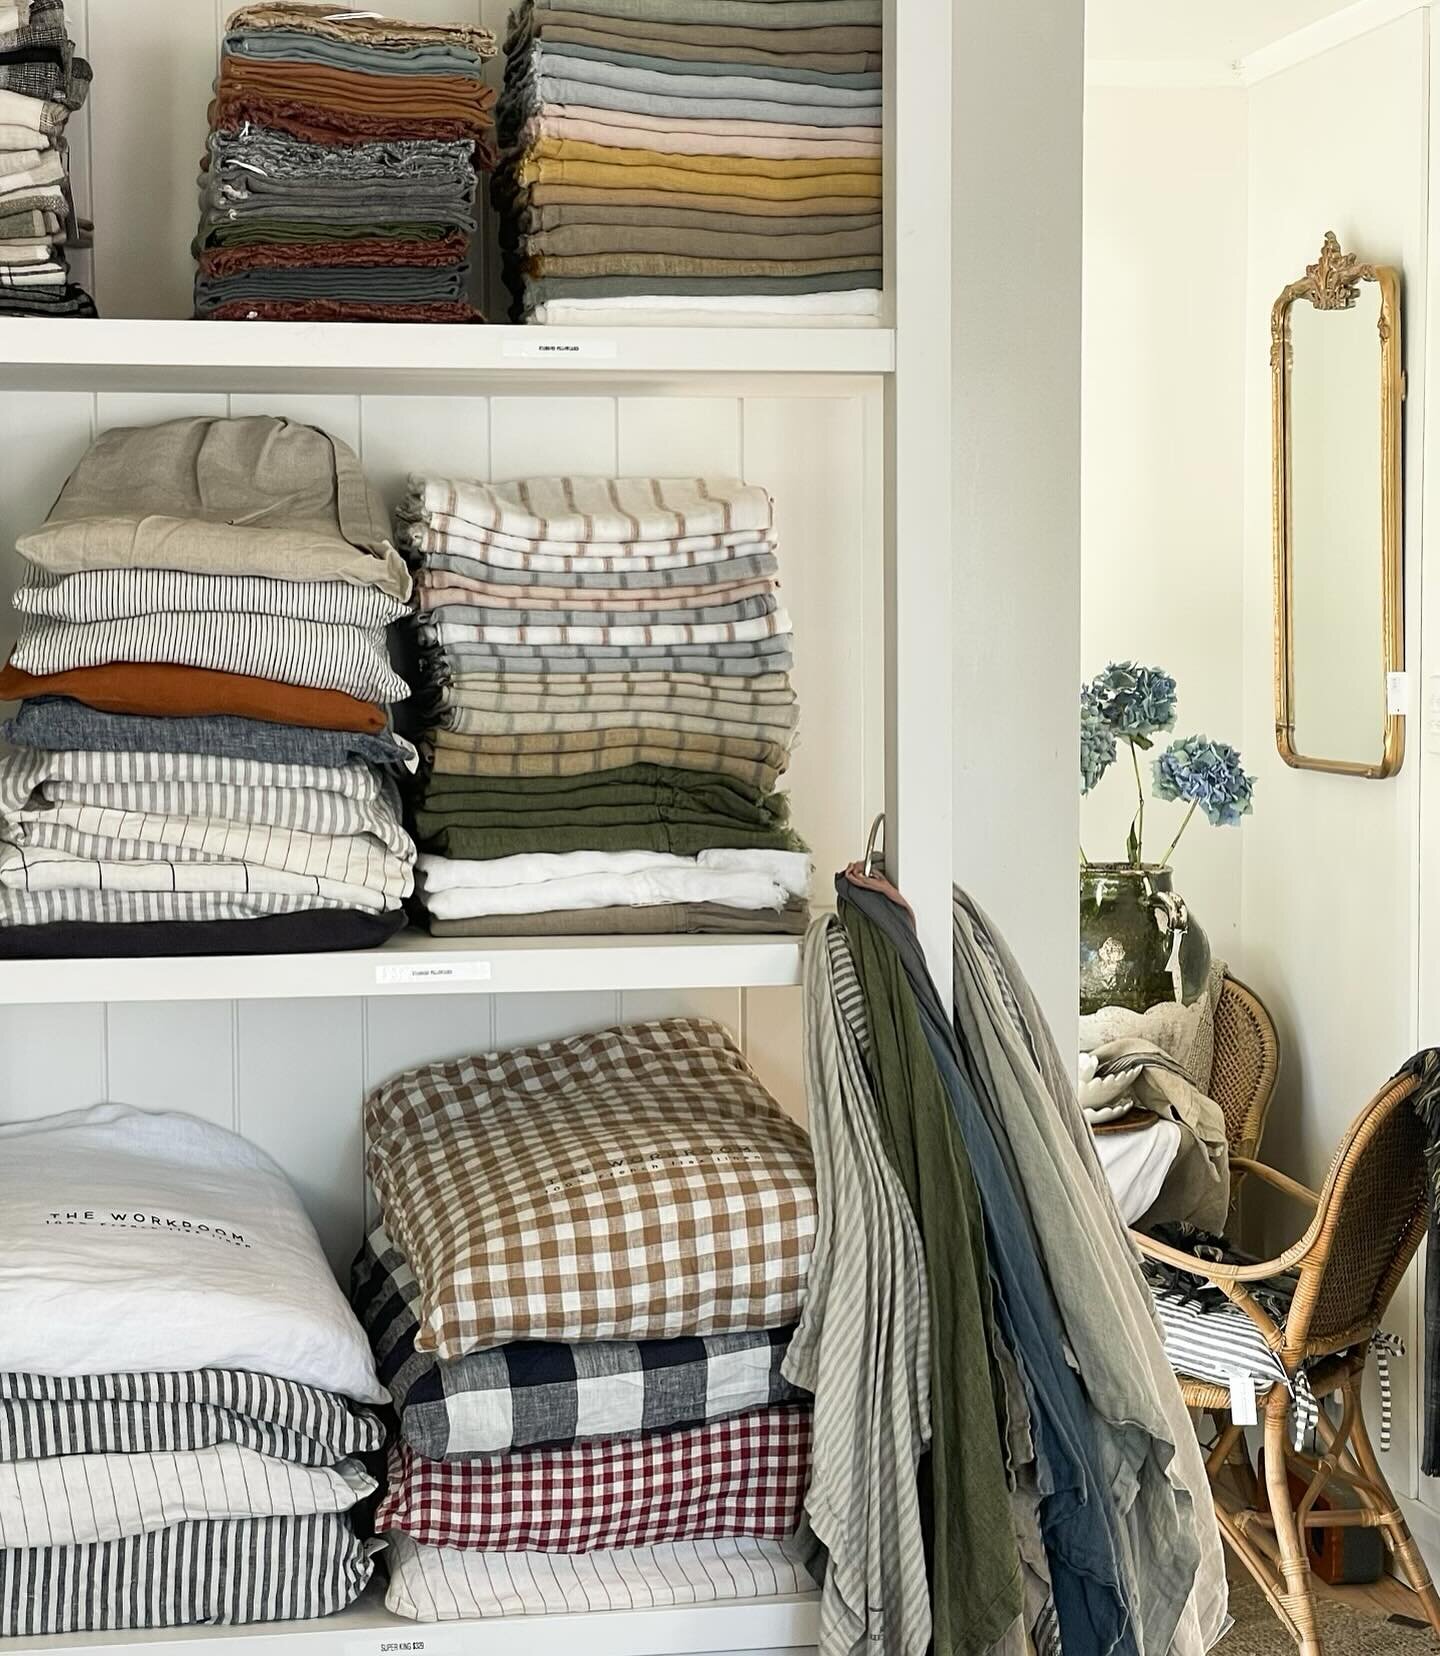 Welcome to The WR Cottage Bedding Room, a haven dedicated to fulfilling all your bedding needs. Discover a curated collection featuring renowned brands like @halemercantileco, @pony_rider @inthesaclinen , Le Lin, and more!  From timeless classics to 